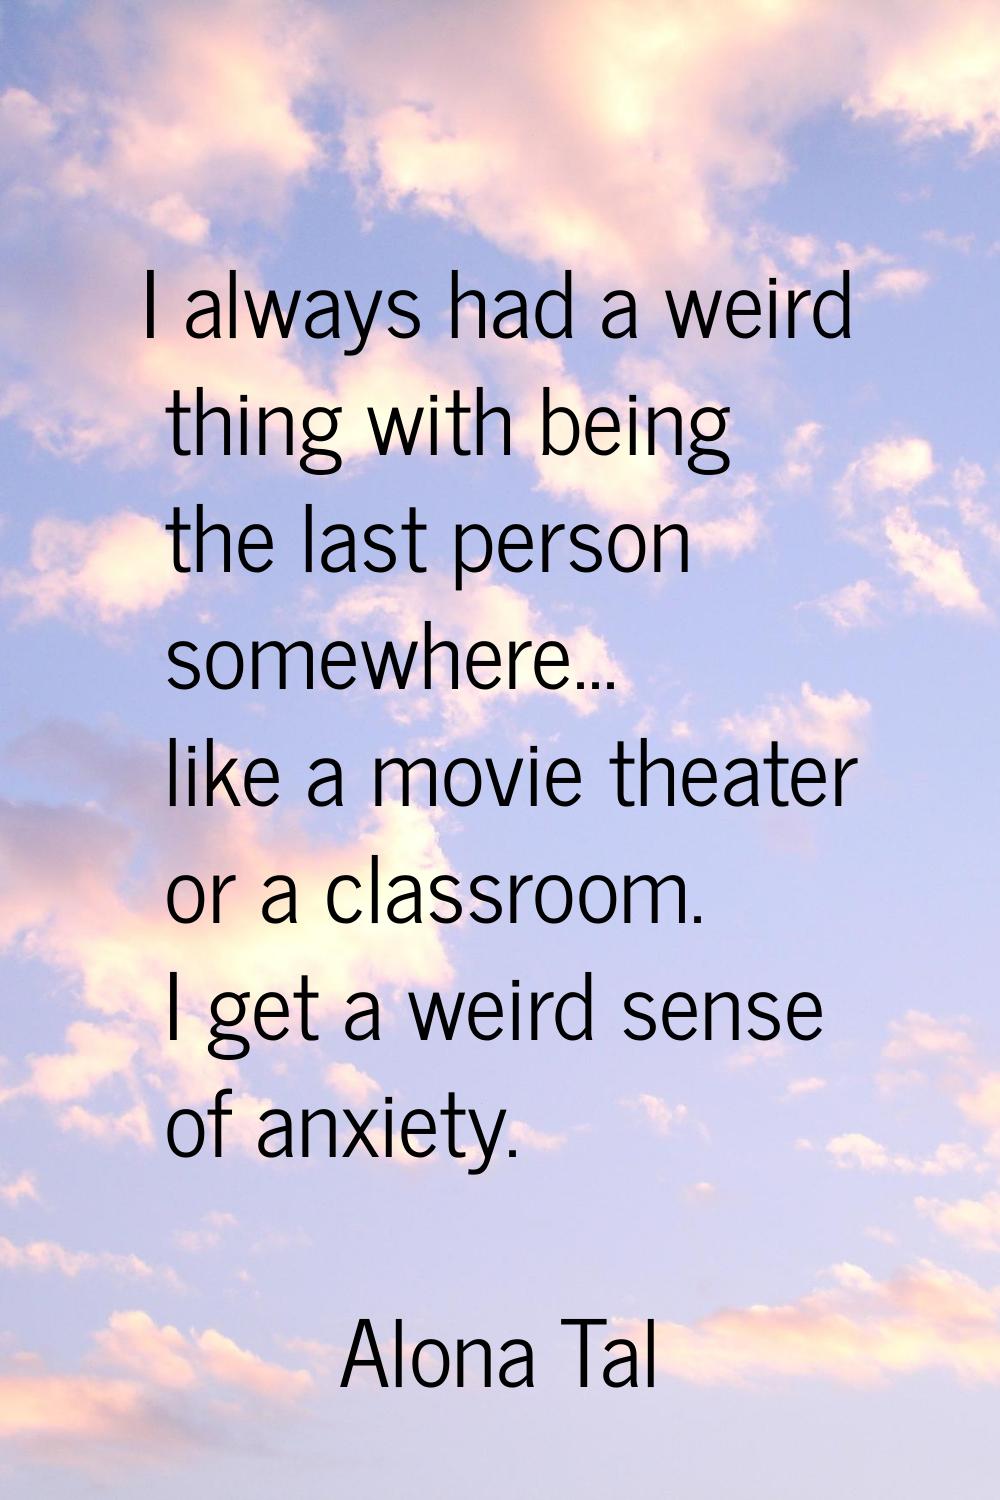 I always had a weird thing with being the last person somewhere... like a movie theater or a classr